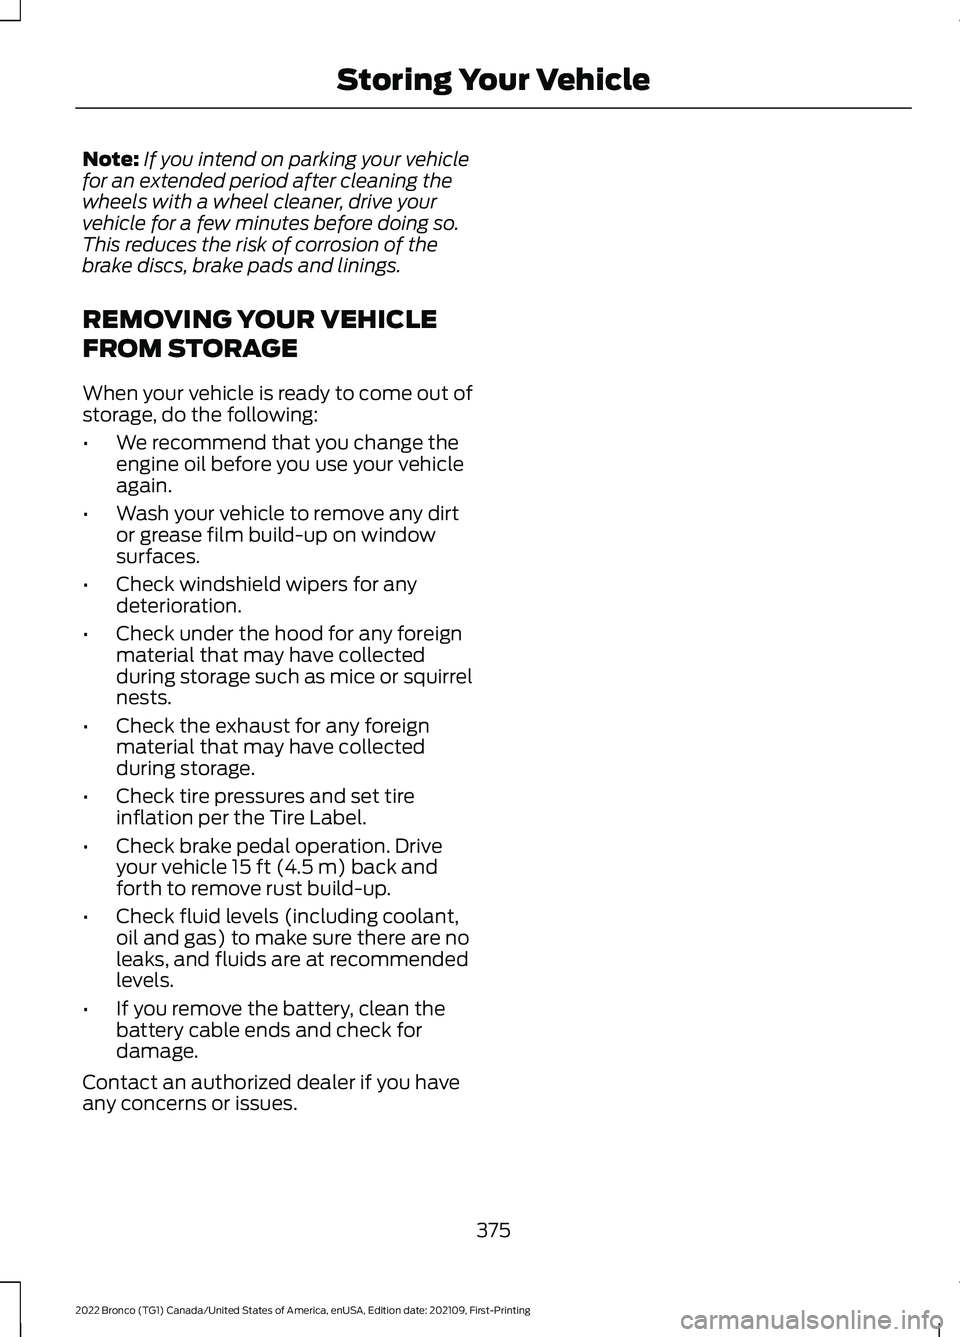 FORD BRONCO 2022  Owners Manual Note:If you intend on parking your vehiclefor an extended period after cleaning thewheels with a wheel cleaner, drive yourvehicle for a few minutes before doing so.This reduces the risk of corrosion o